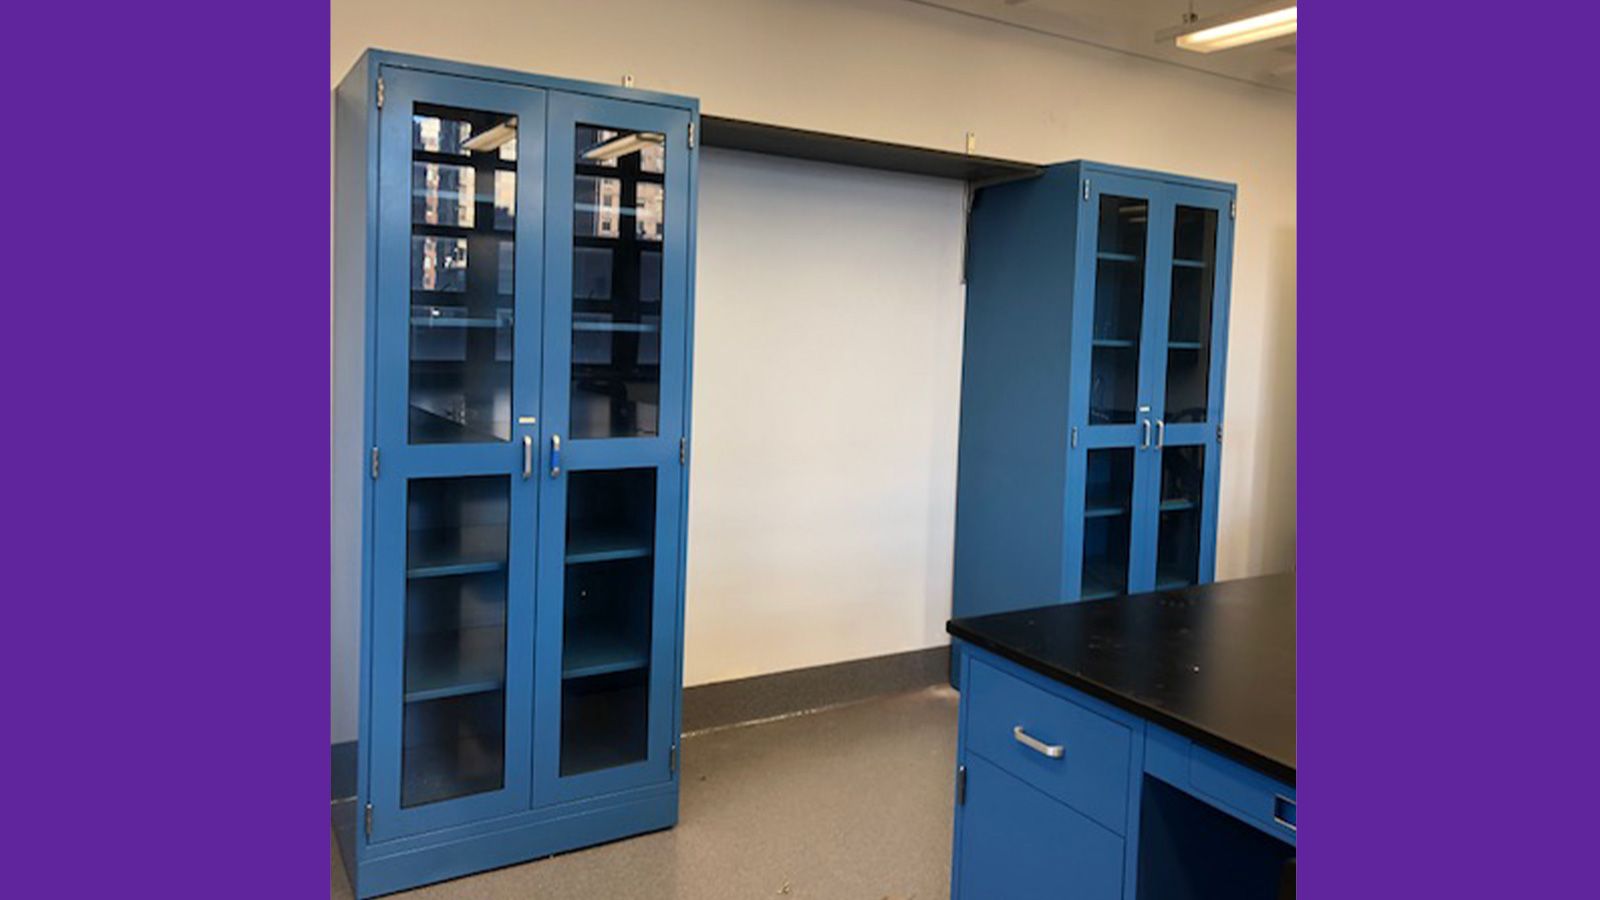 New Anthropology Research Lab Furniture